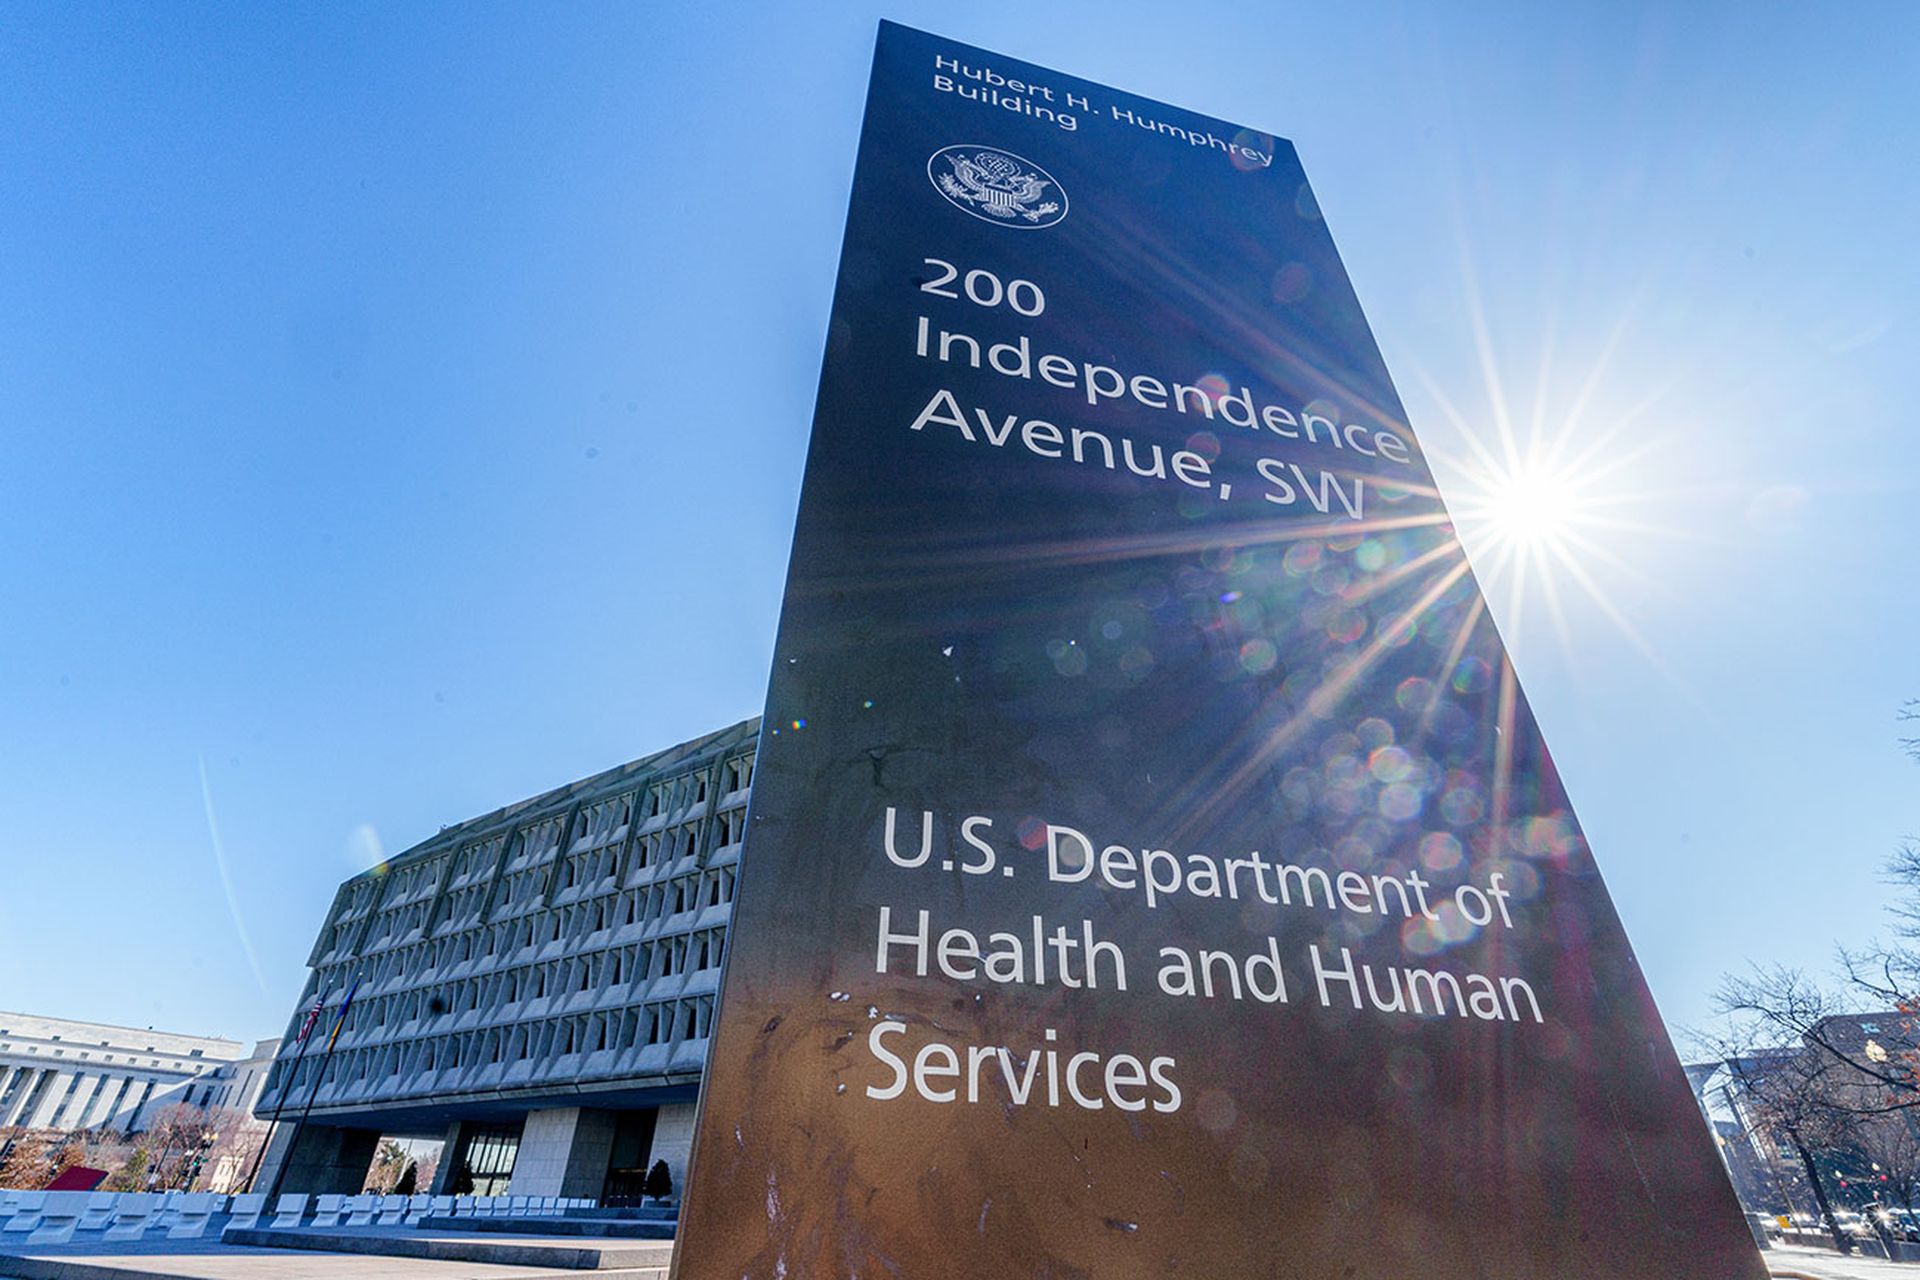 The sun flares next to the sign marking the headquarters building of the US Department of Health and Human Services